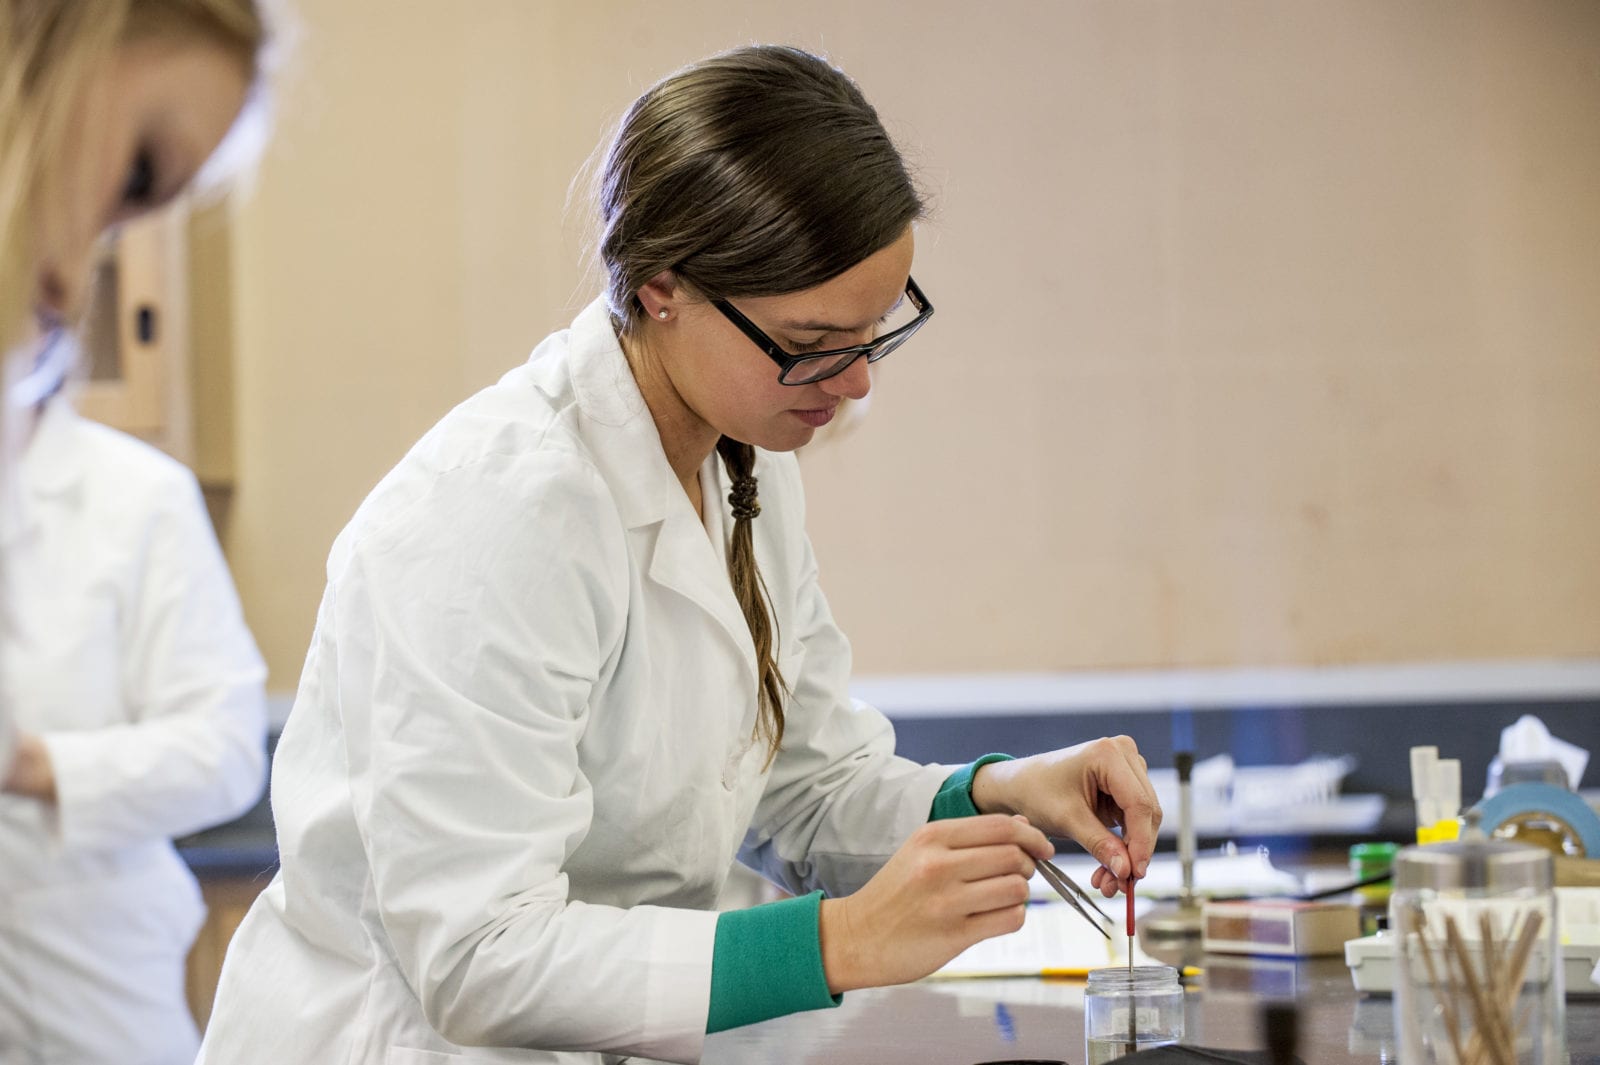 Medical laboratory scientists perform hands-on lab tests in hospitals and large clinics.